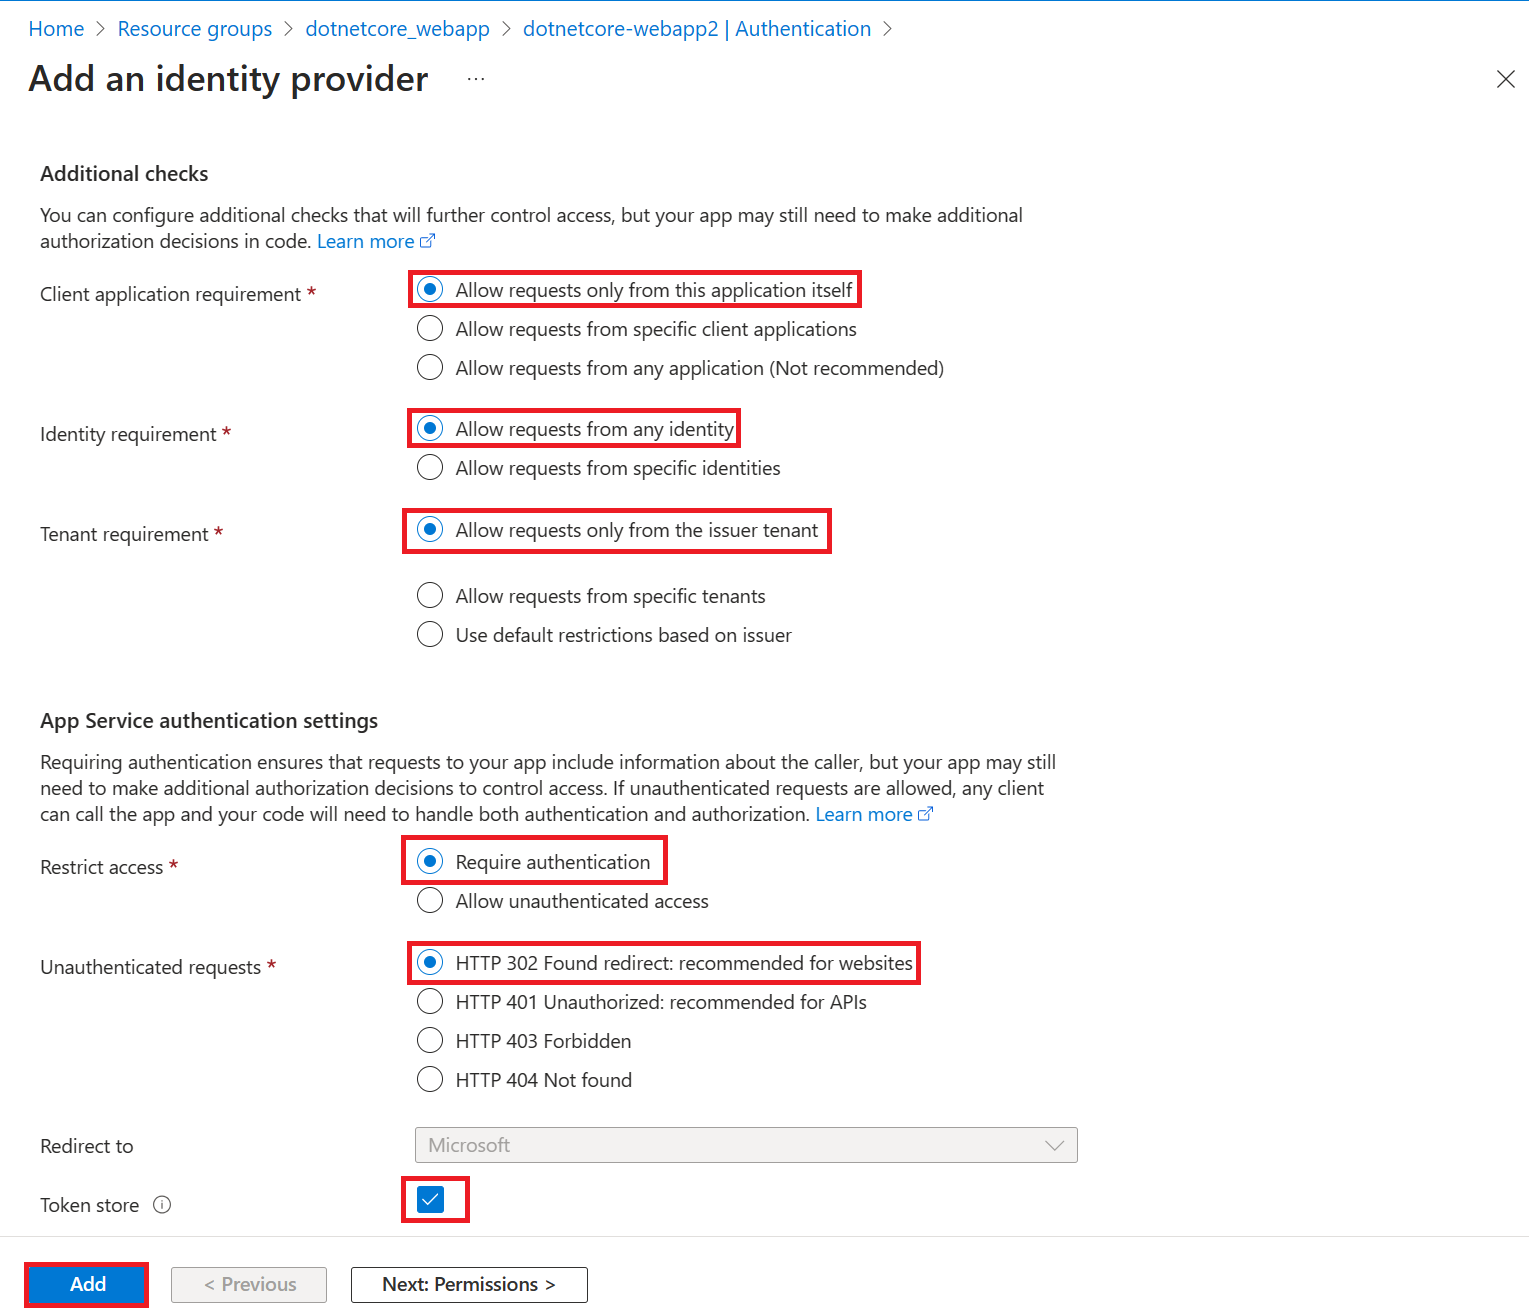 Screenshot that shows the Additional checks and authentication settings sections.